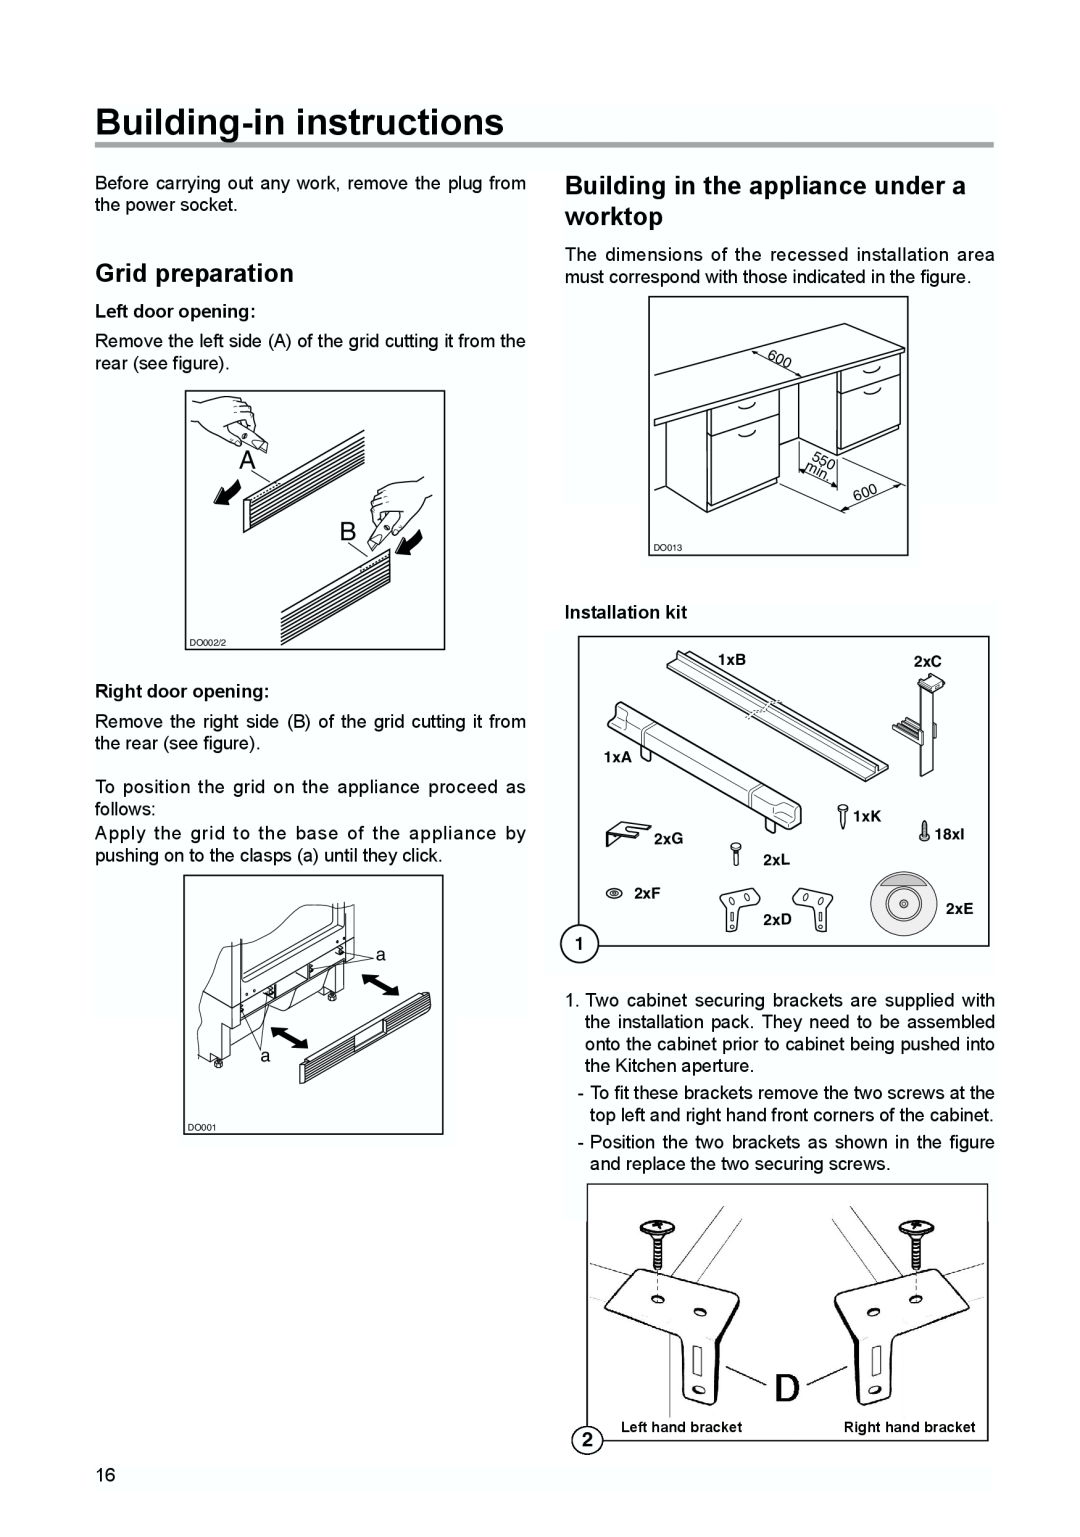 Zanussi ZUD 9124 A Building-in instructions, Grid preparation, Building in the appliance under a worktop, Installation kit 